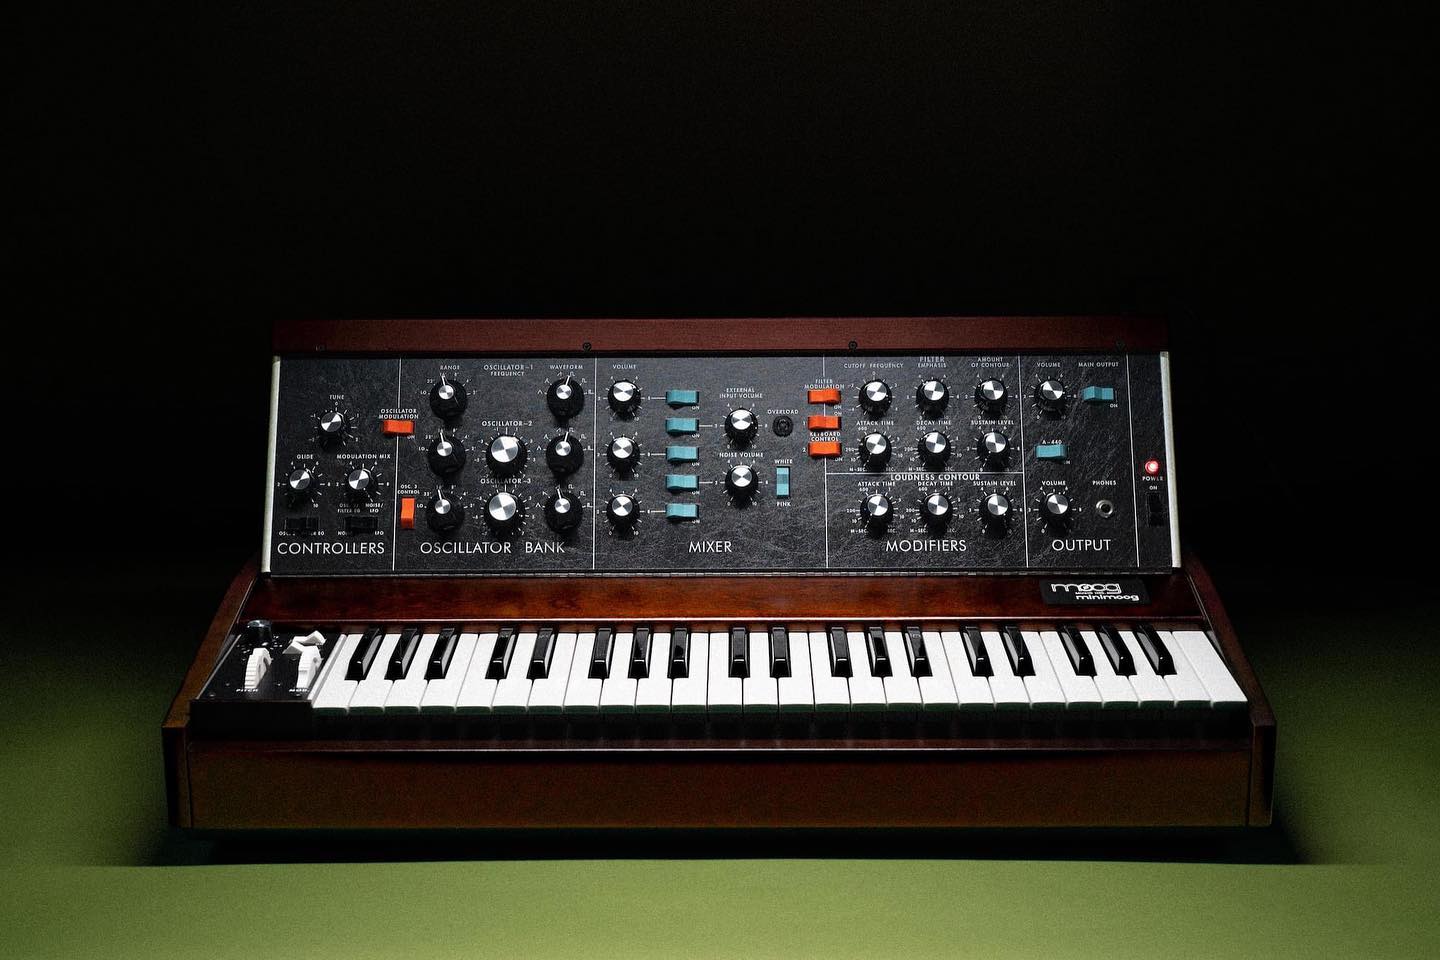 Yes! The Moog Model D is back! I slept on the reissue and regretted it. This will be mine!  @moogsynthesizers